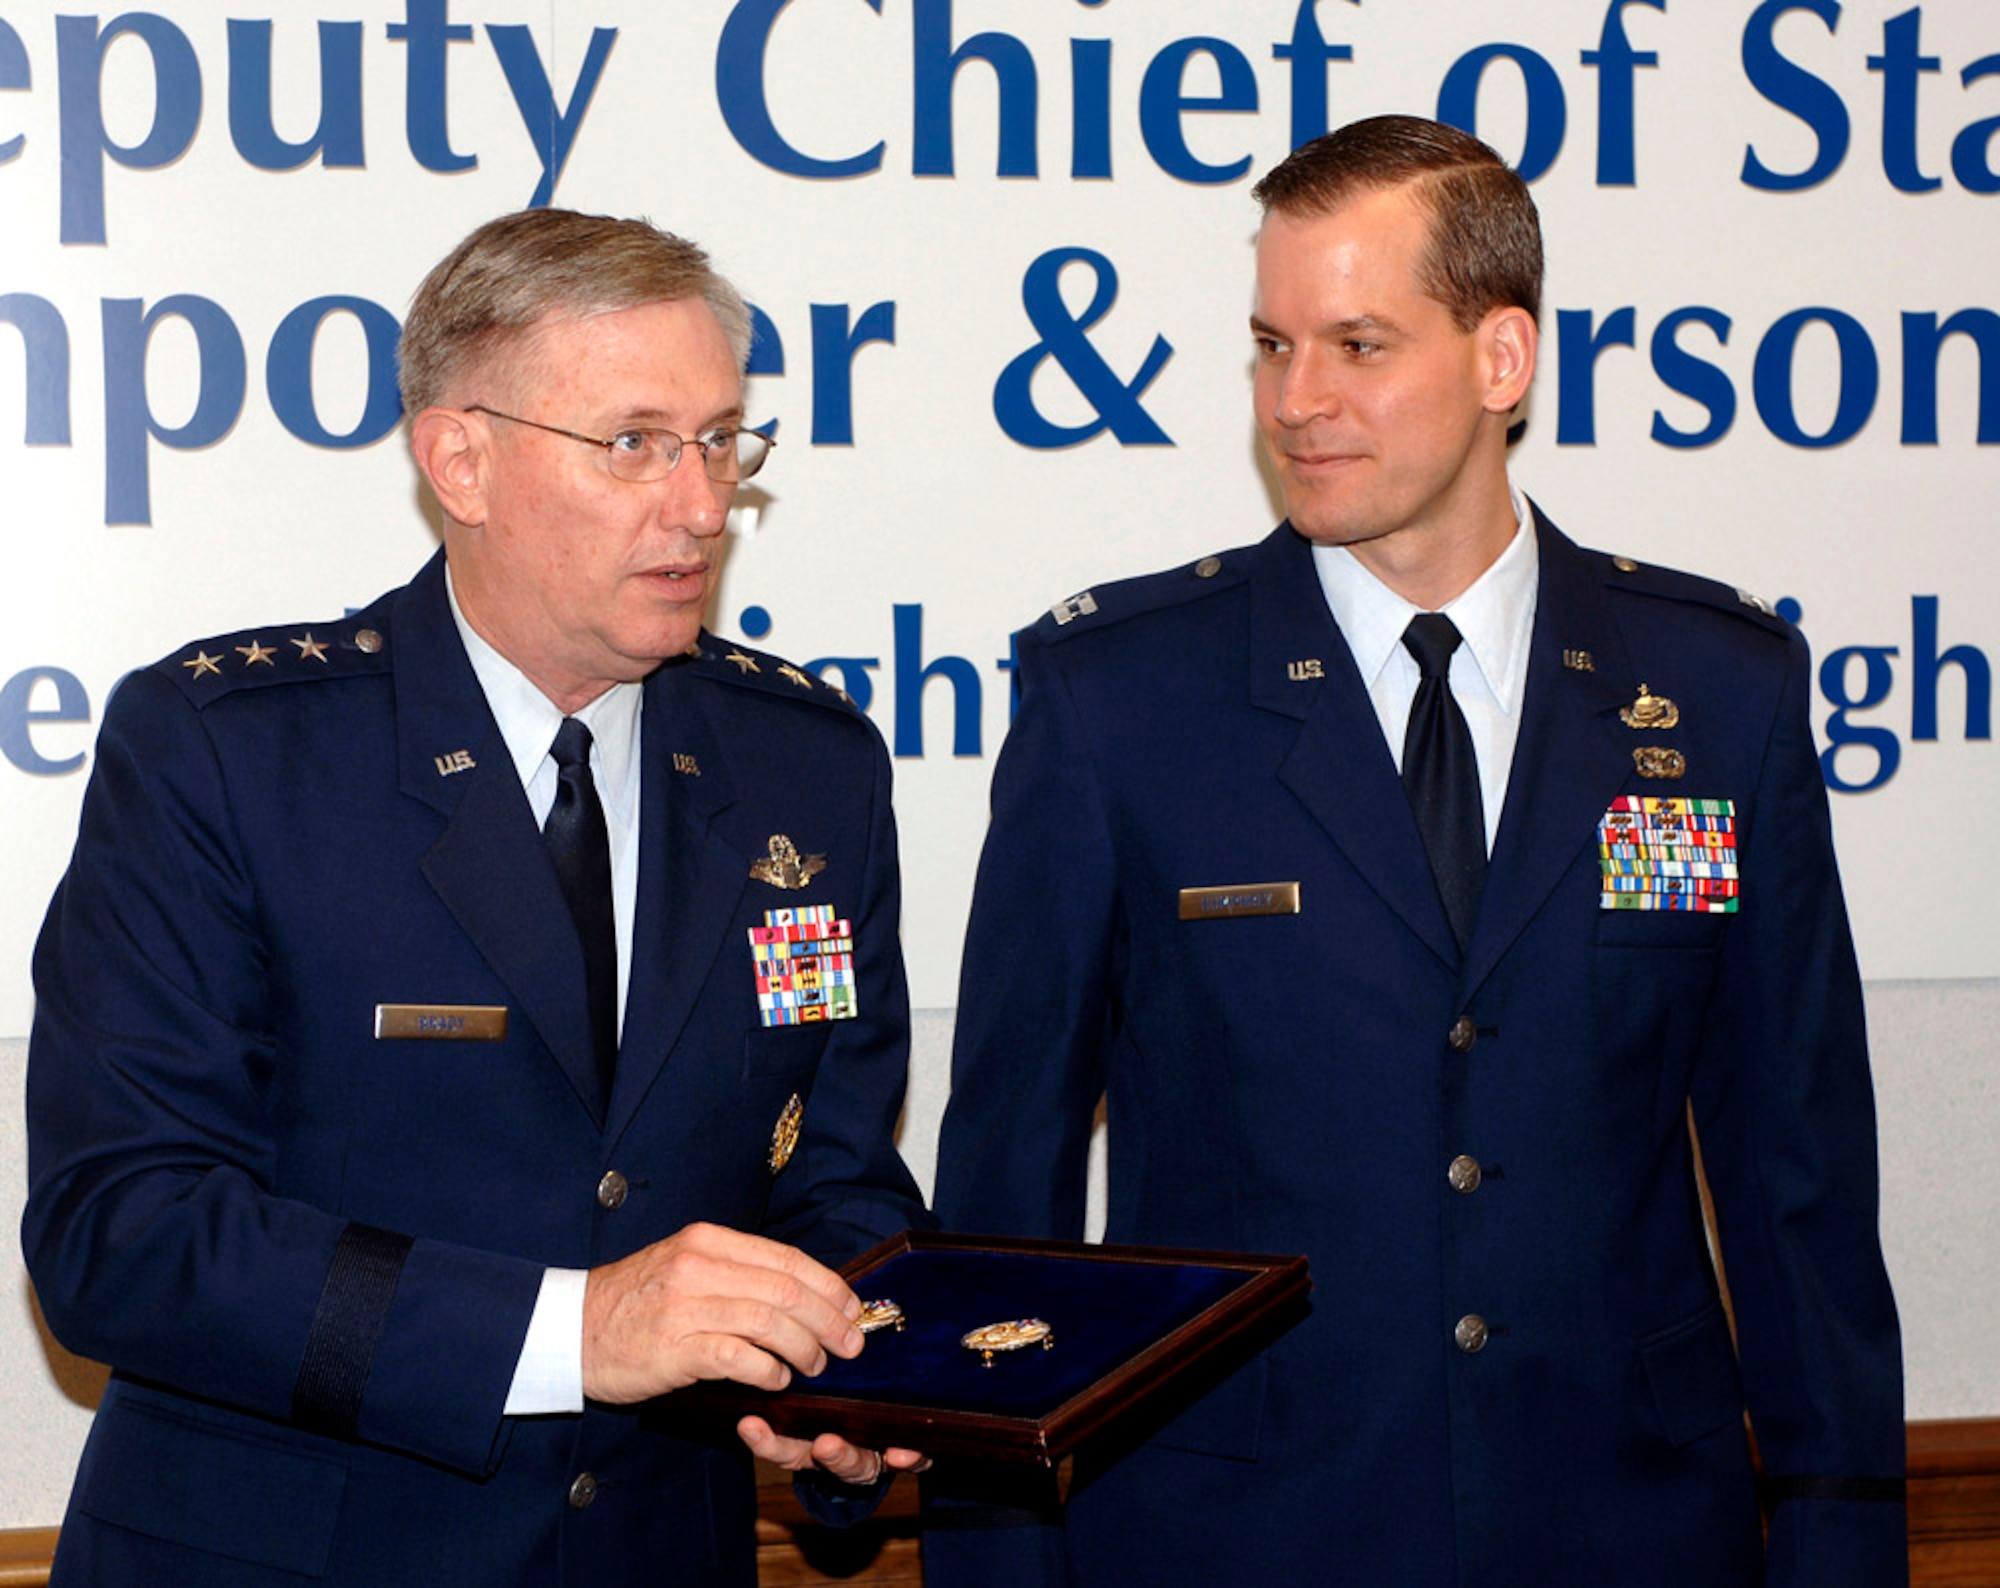 Lt. Gen. Roger Brady, deputy chief of staff for manpower and personnel, prepares to present the new Headquarters Air Force badge to Capt. Brian Humphrey during a ceremony marking the official release of the badge on Friday, May 19, 2006, in the Pentagon.  Airmen assigned to the Pentagon will have the option to wear the new badge.  The basis for the badge is Air Force heritage and the design incorporates many elements from the Department of the Air Force Seal.  Air Force Chief of Staff Gen. T. Michael Moseley approved the design and development of the badge in September.  (U.S. Air Force photo/Tech. Sgt. Scott M. Ash)